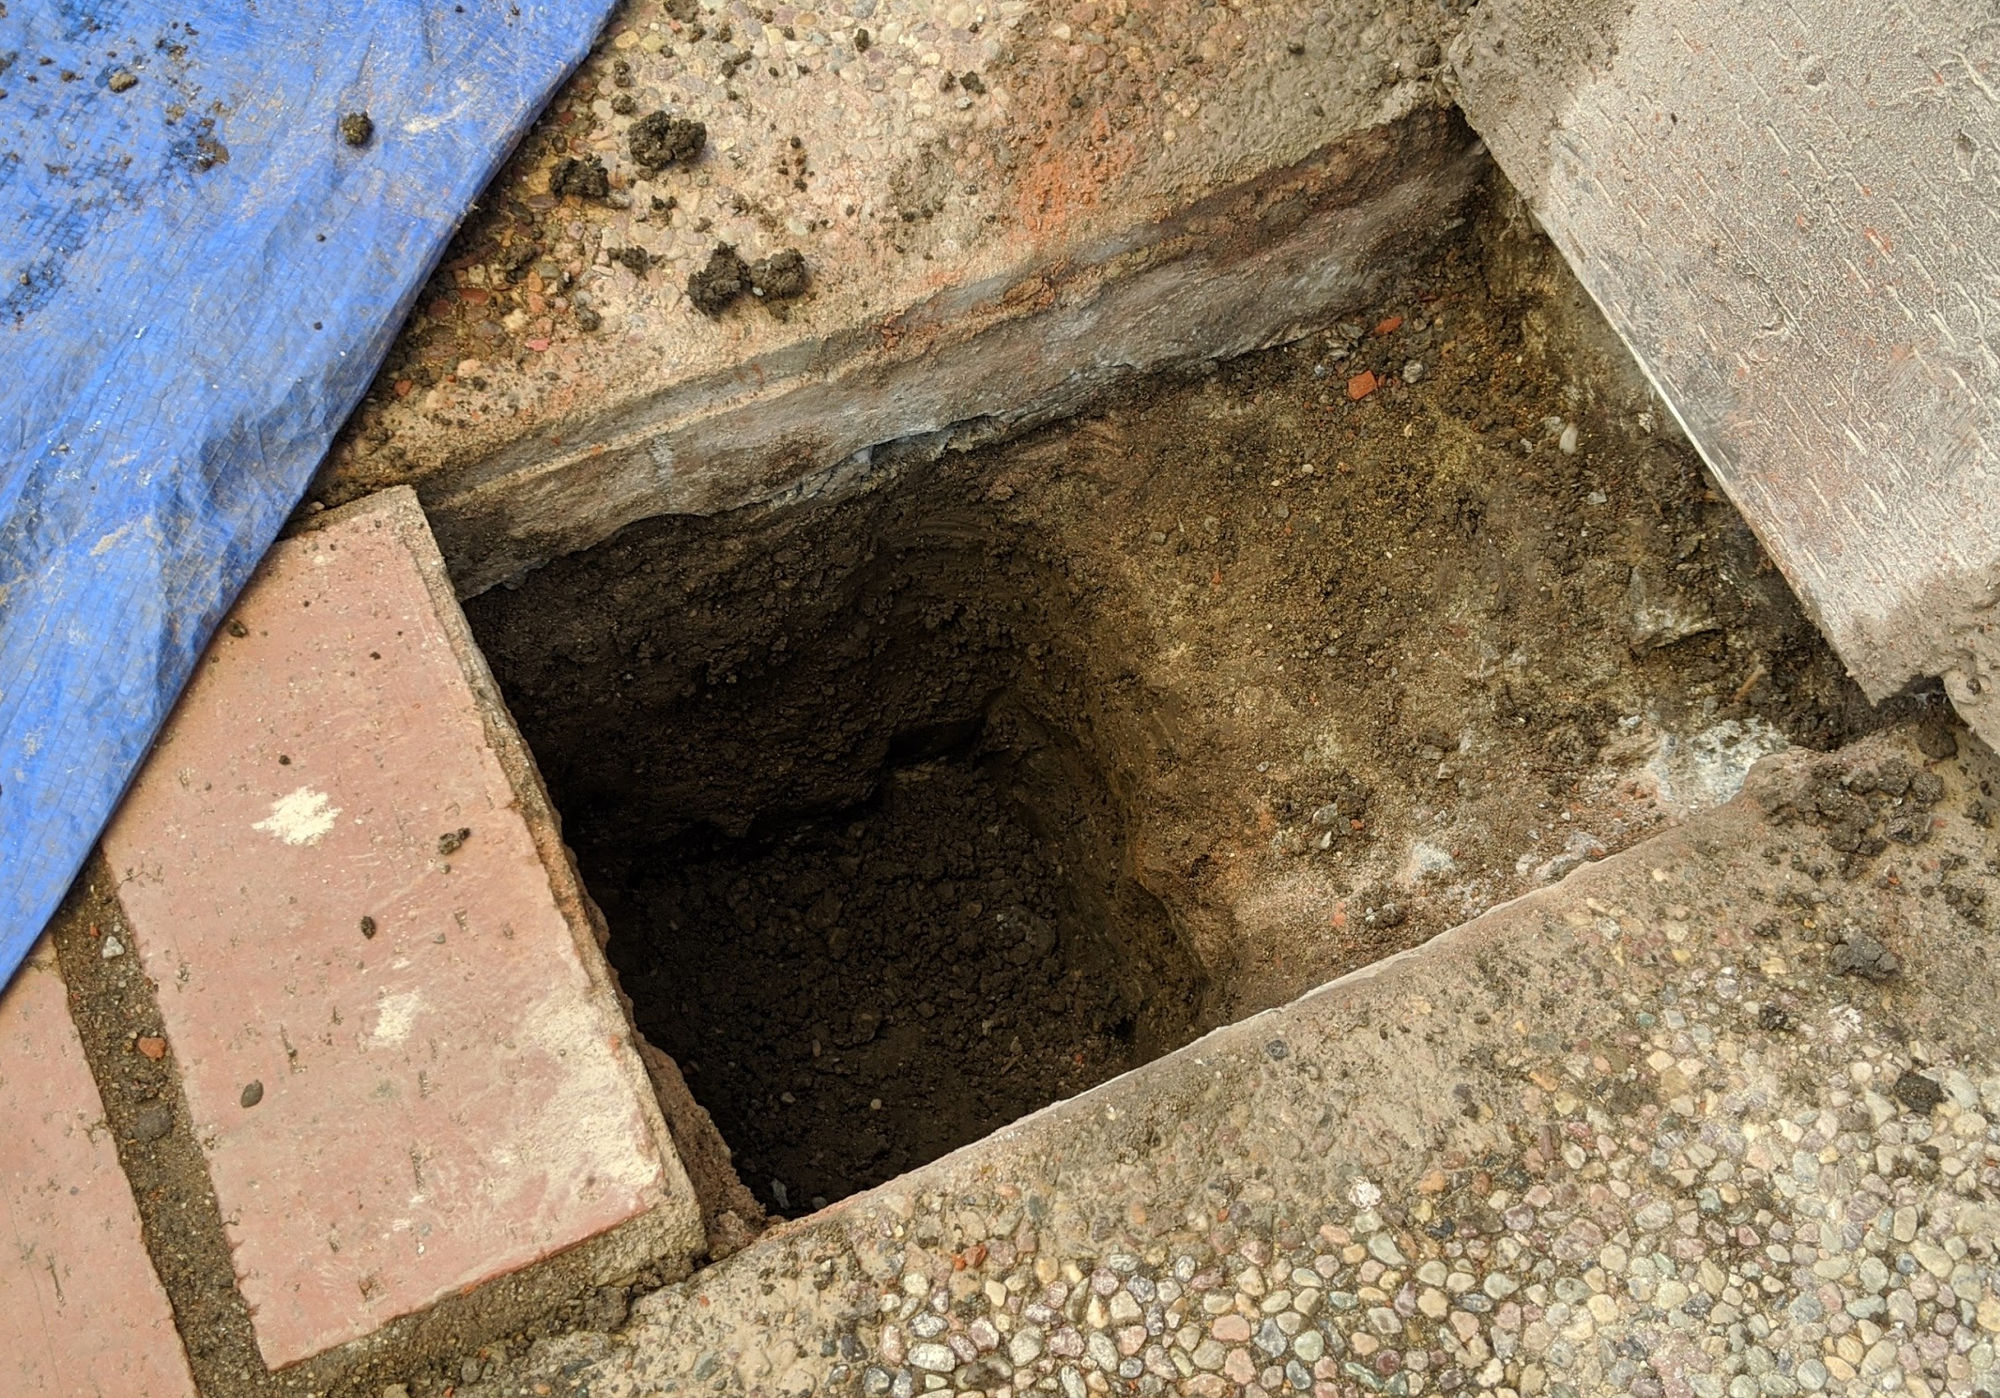 Make a rectangular hole in cement with clean edges